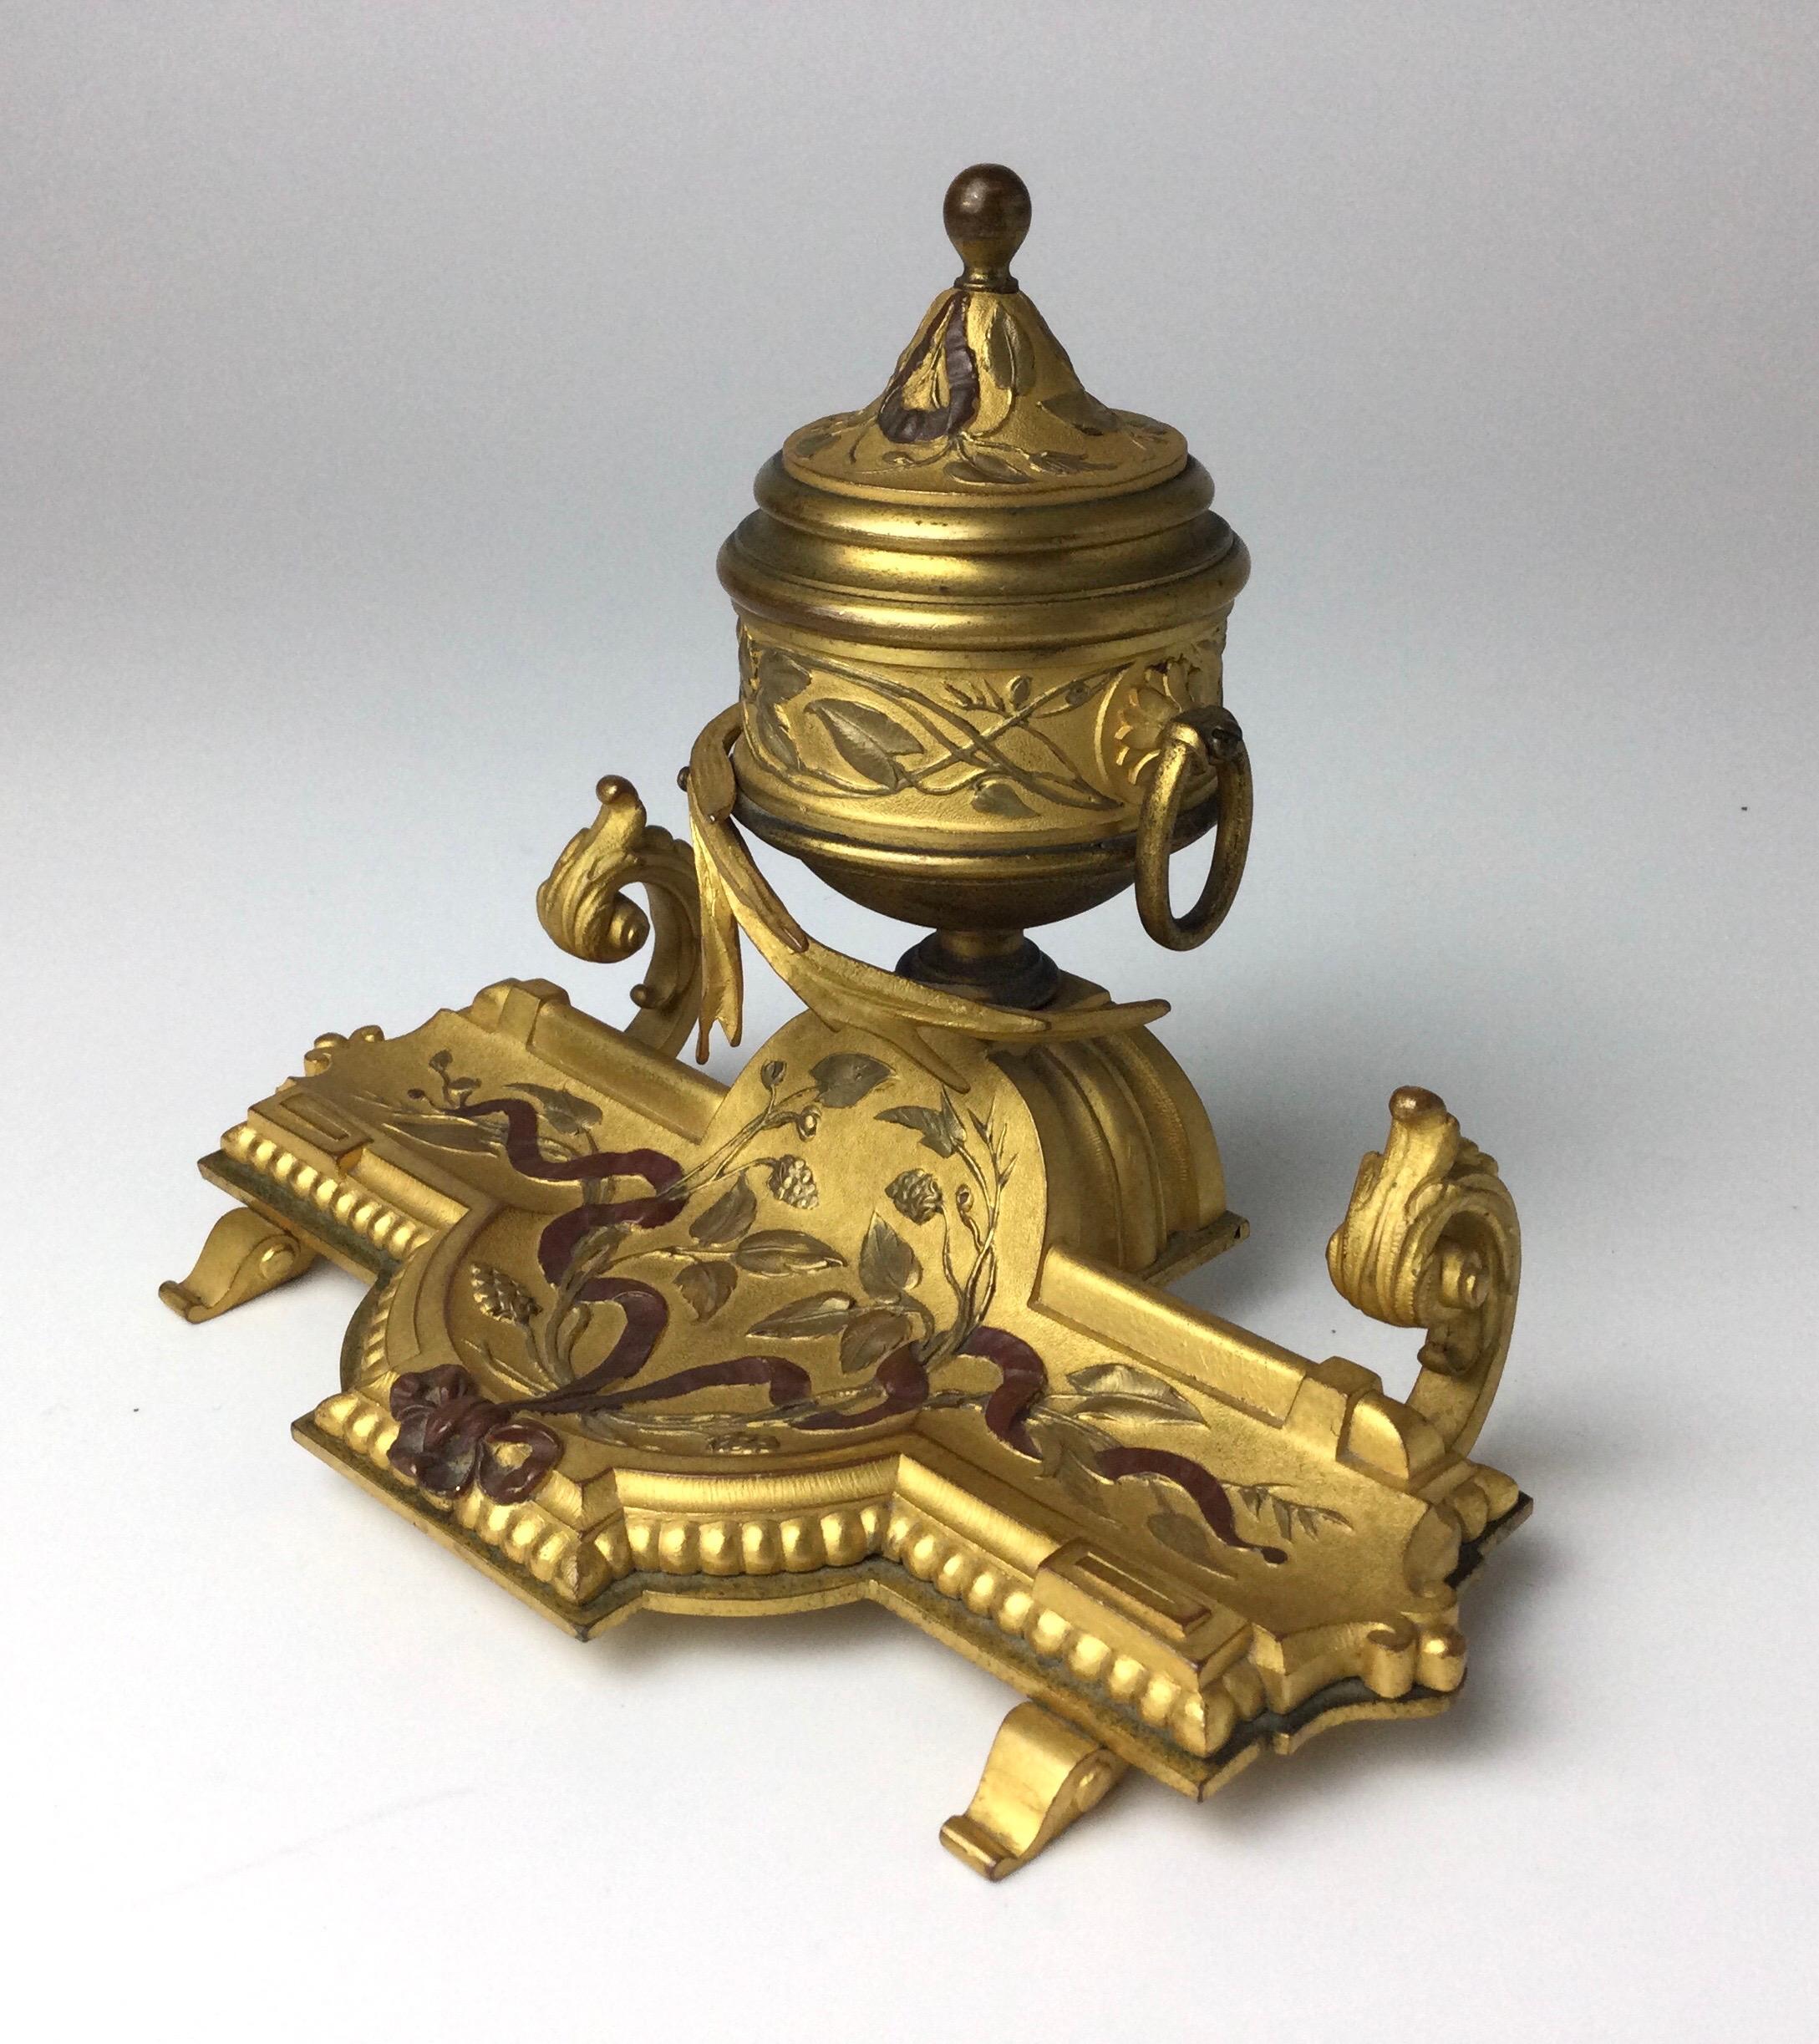 Beautiful mid-19th century gilt bronze French inkwell. Measures: 6 1/2' wide by 4